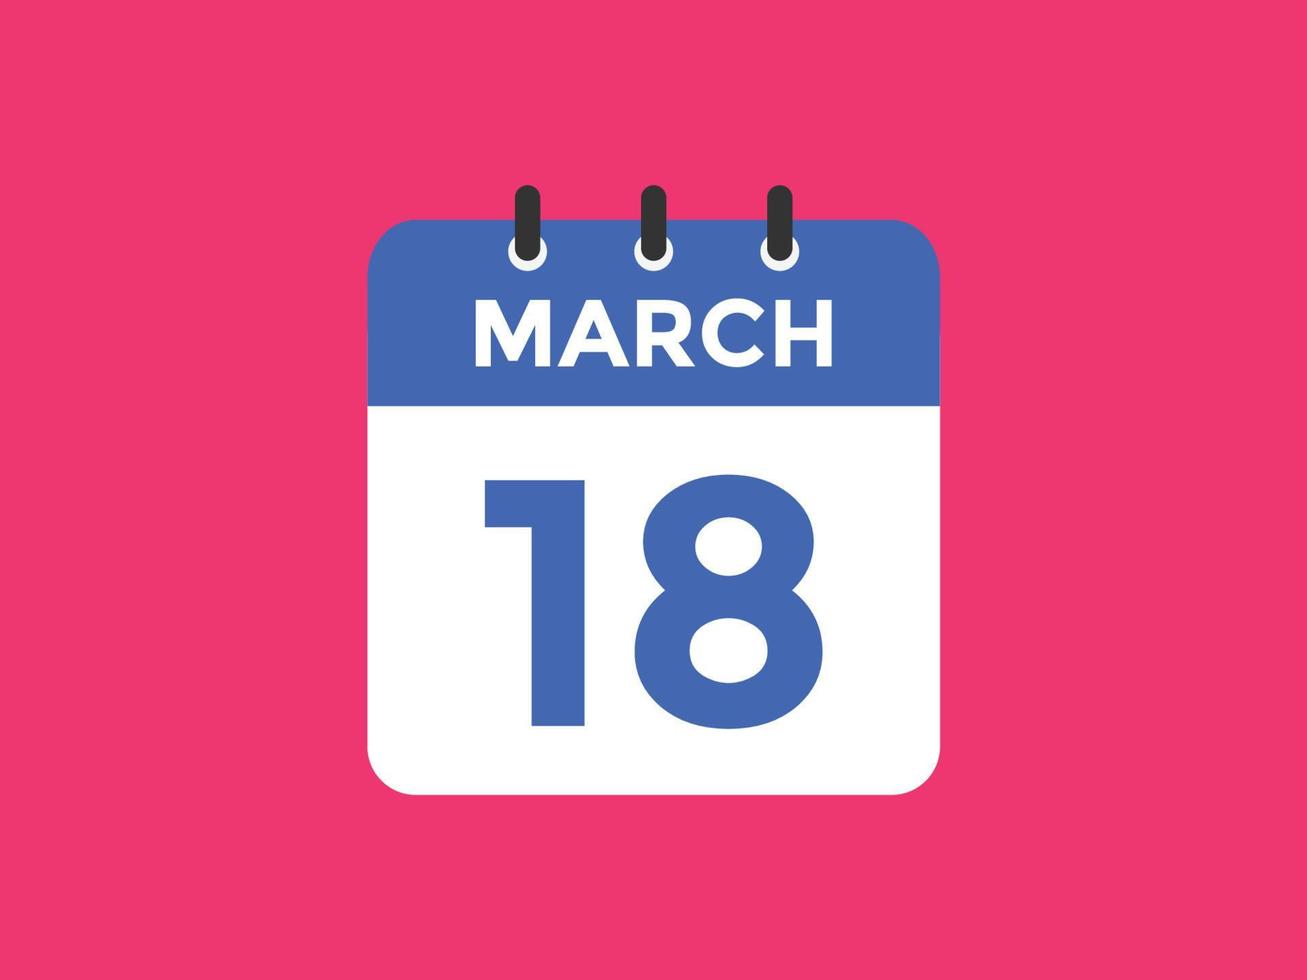 march 18 calendar reminder. 18th march daily calendar icon template. Calendar 18th march icon Design template. Vector illustration